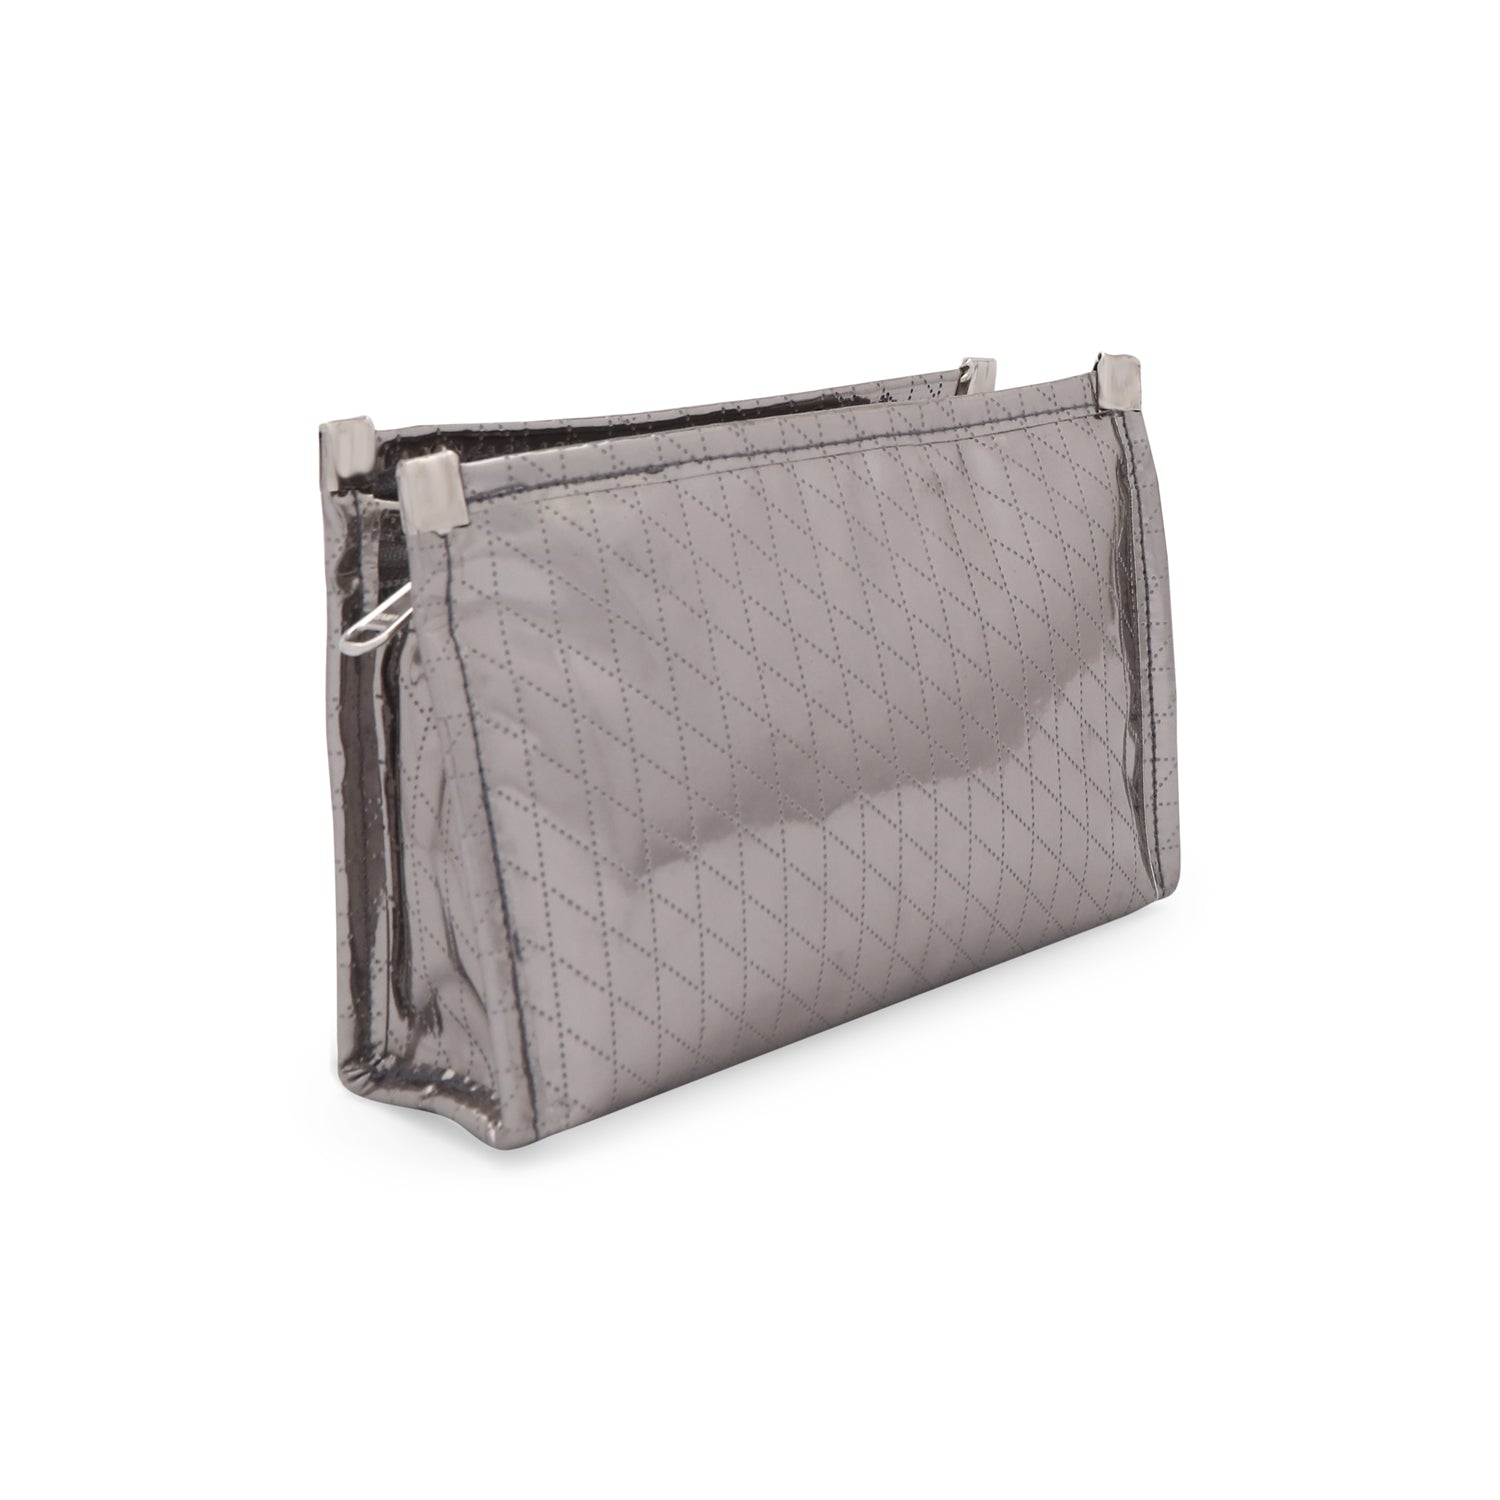 Travel Pouch - Silver 3 Pockets Pouch - Set of 3 Pouches